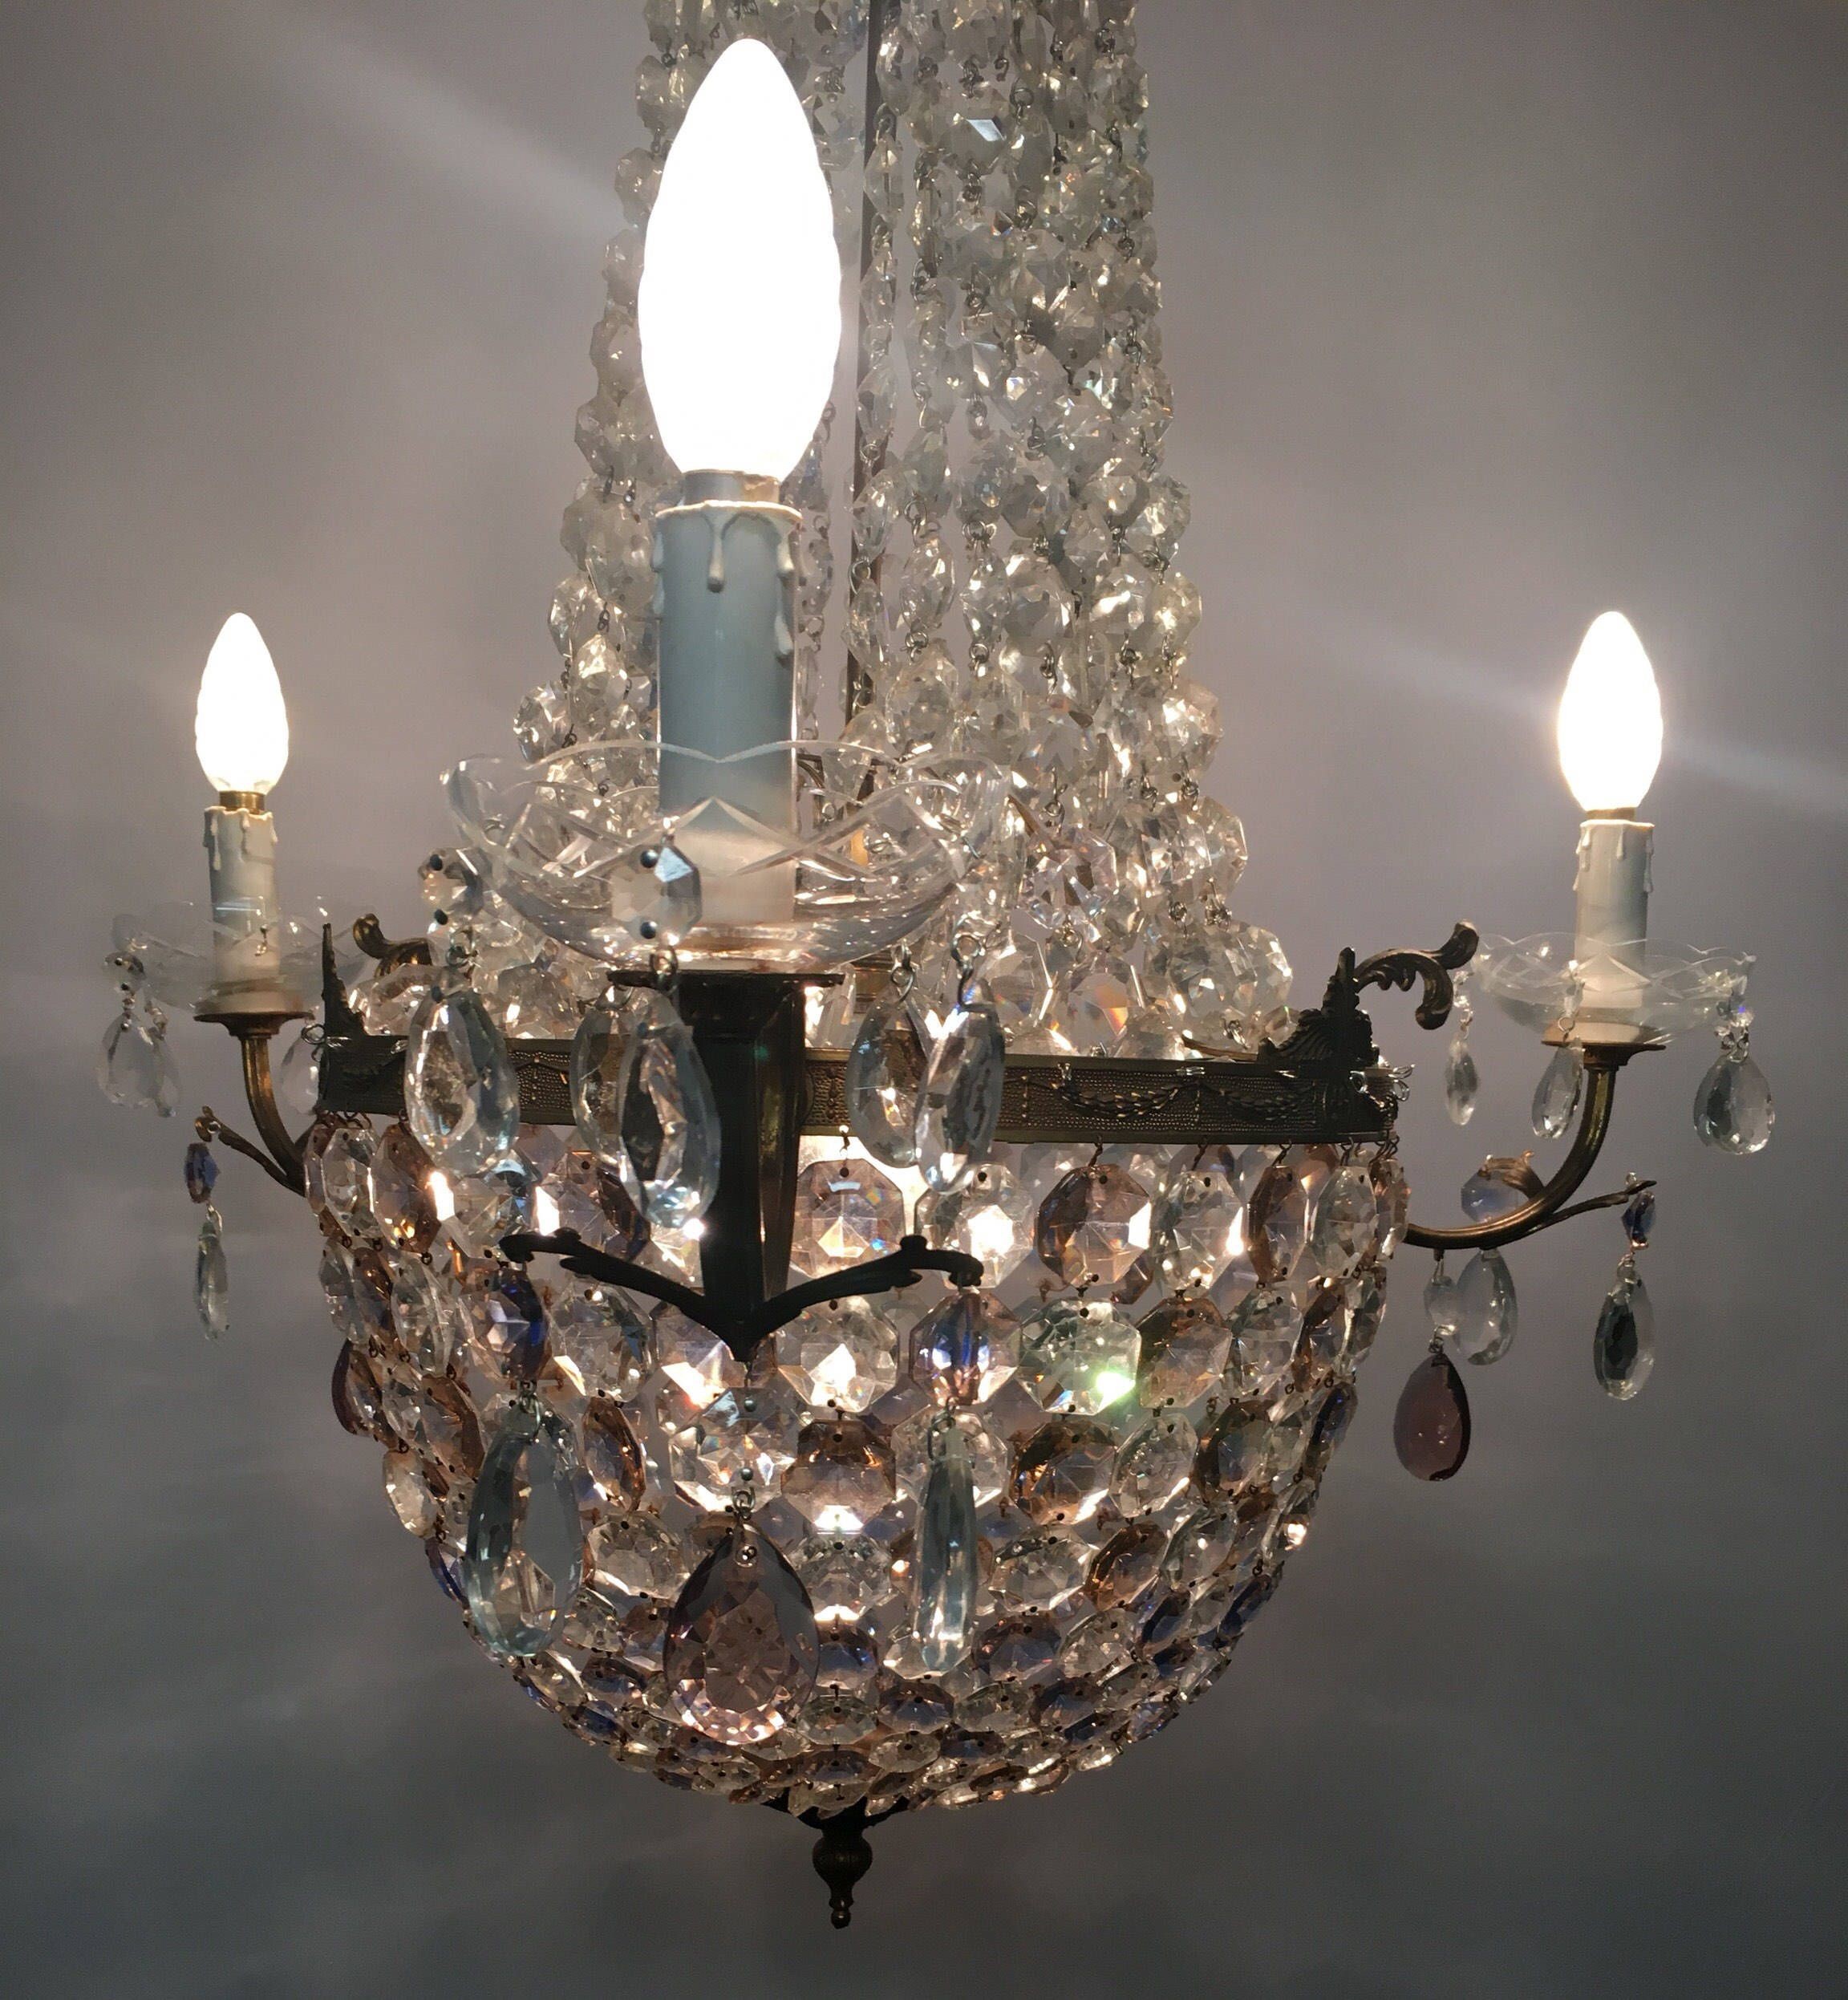 Murano Chandelier Crystal Chandelier Empire Chandelier Vintage Crystal Beaded Chandelier Wiring p USA Free Shipping USA